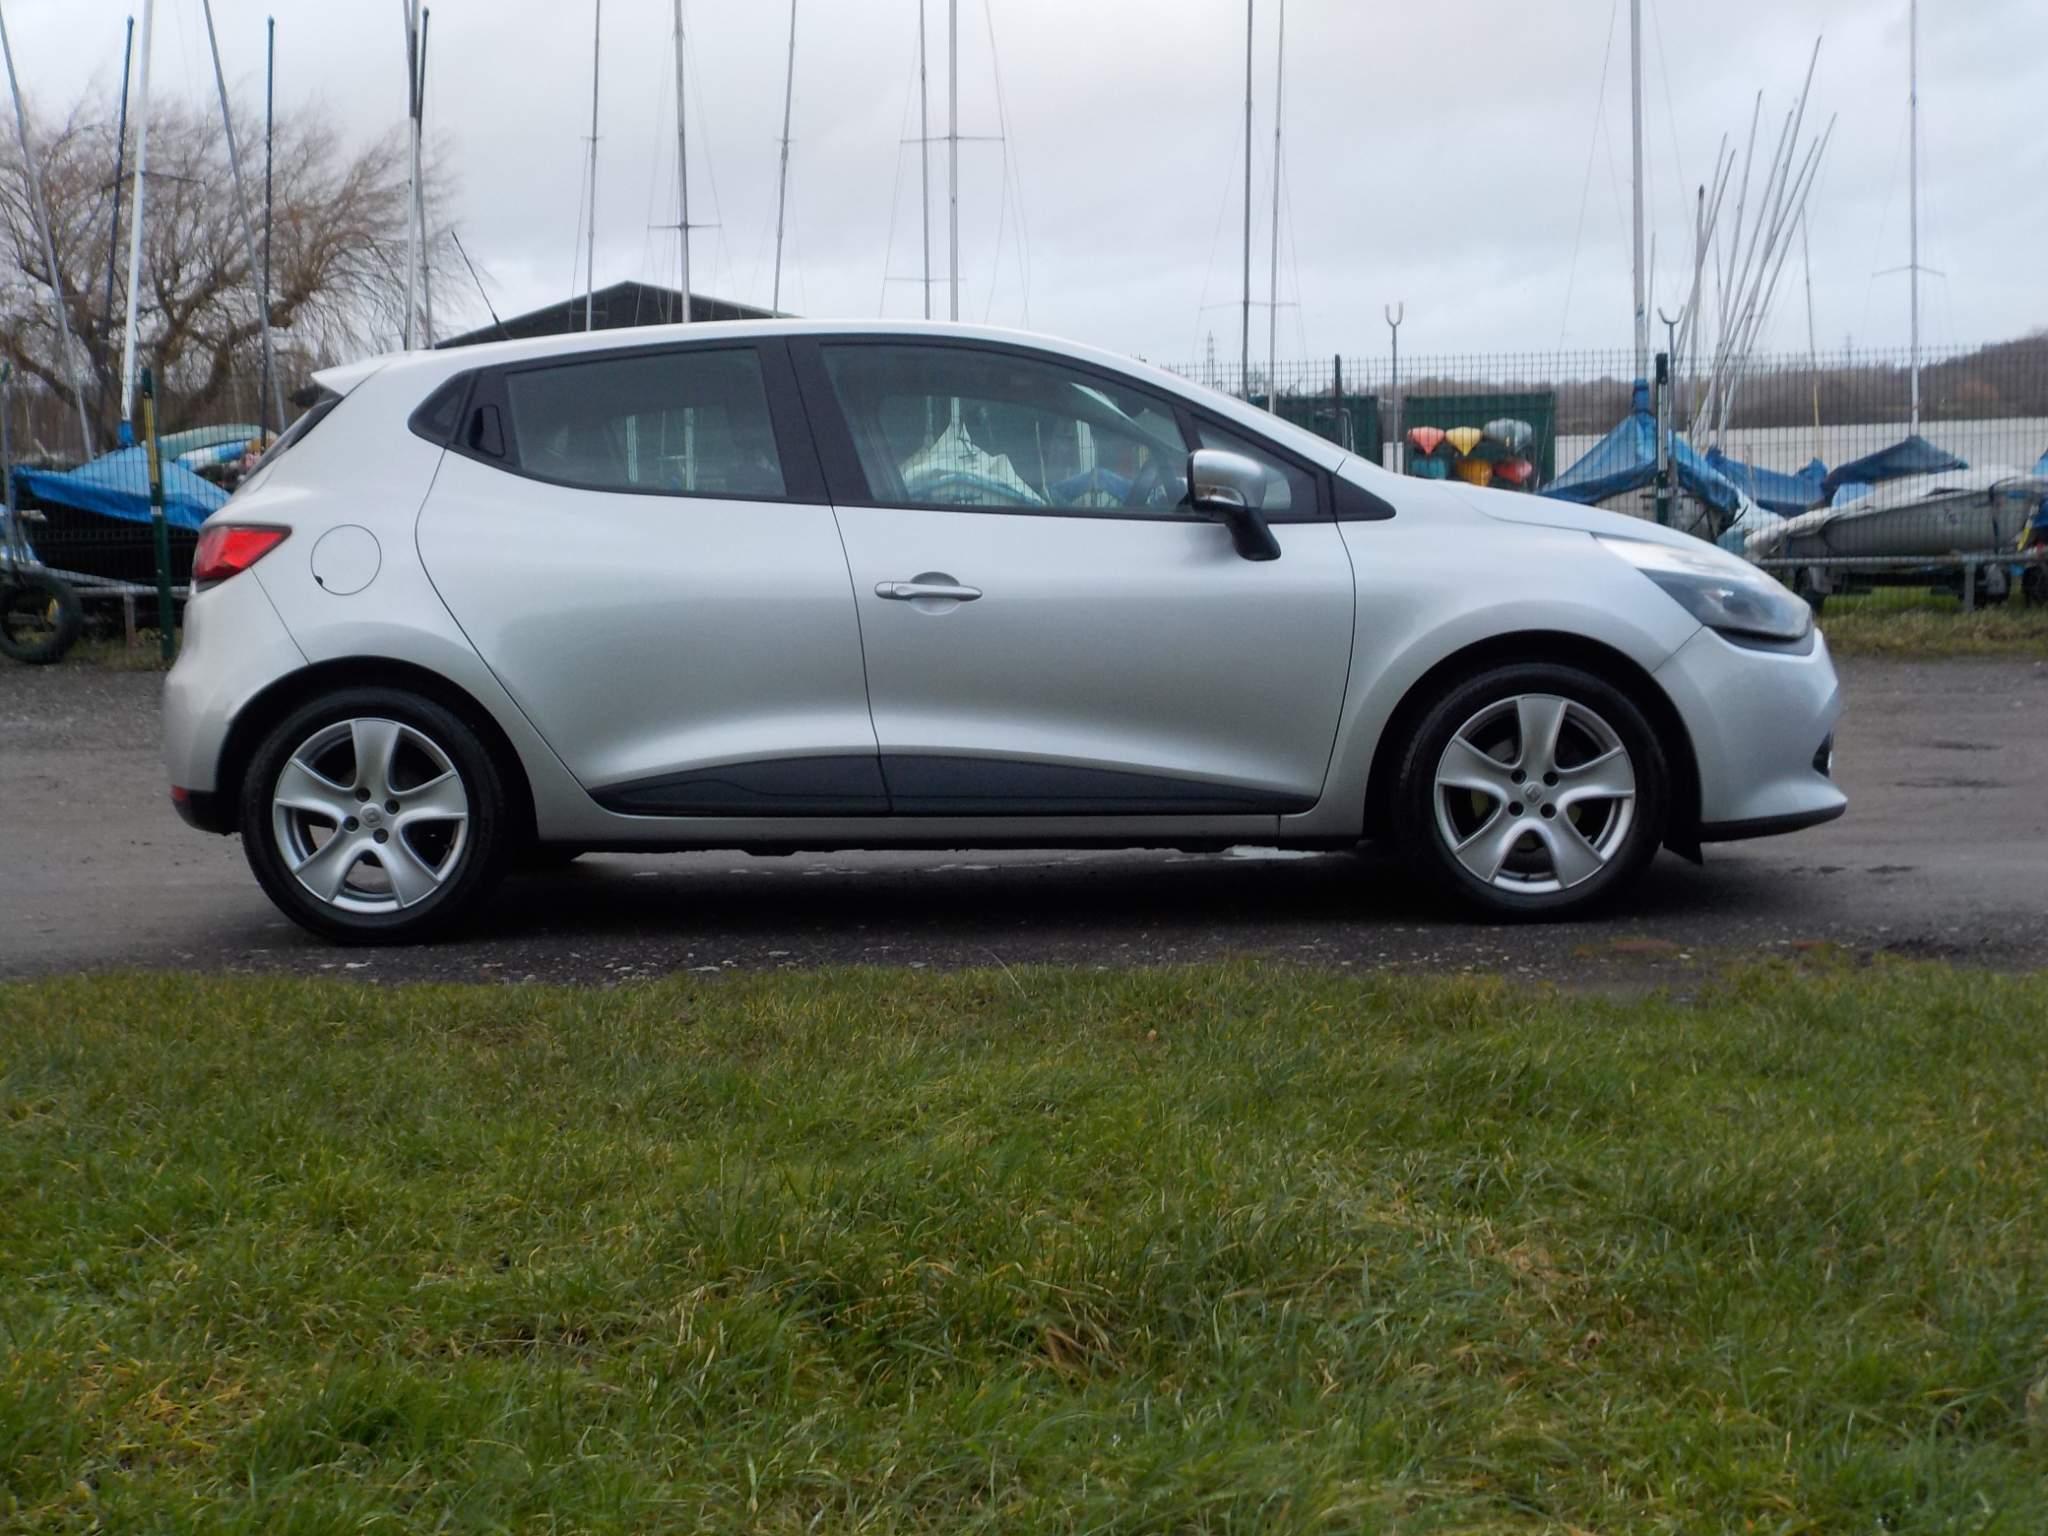 Renault Clio 0.9 TCe Expression + Euro 5 (s/s) 5dr